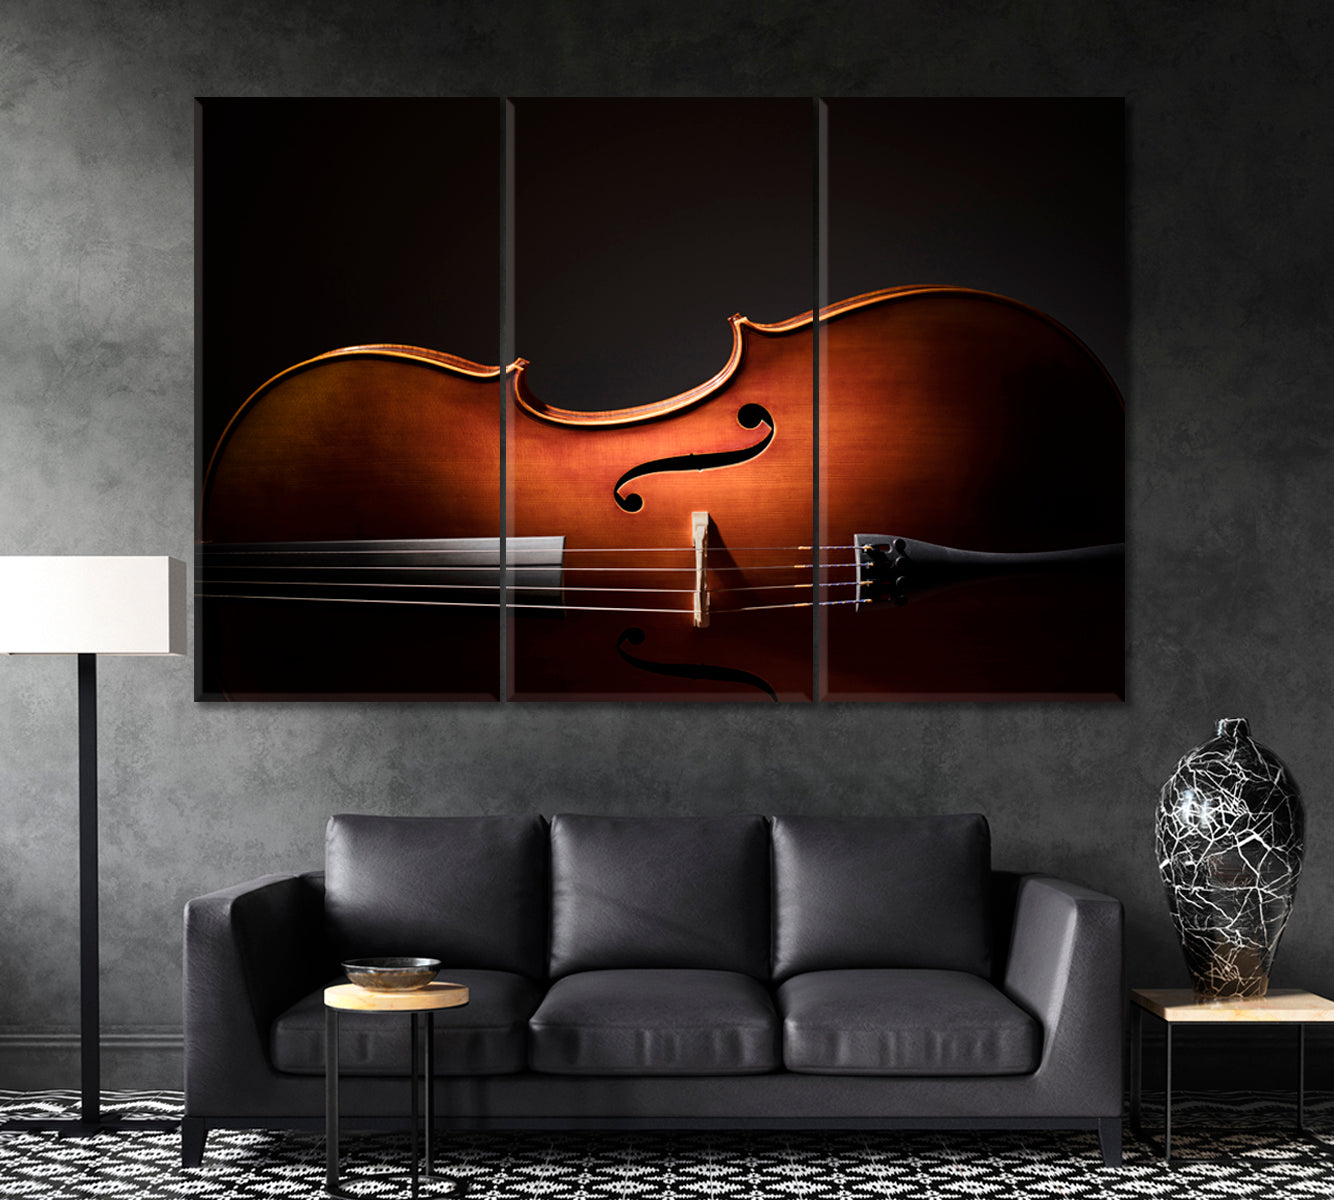 Silhouette of Cello Canvas Print ArtLexy 3 Panels 36"x24" inches 